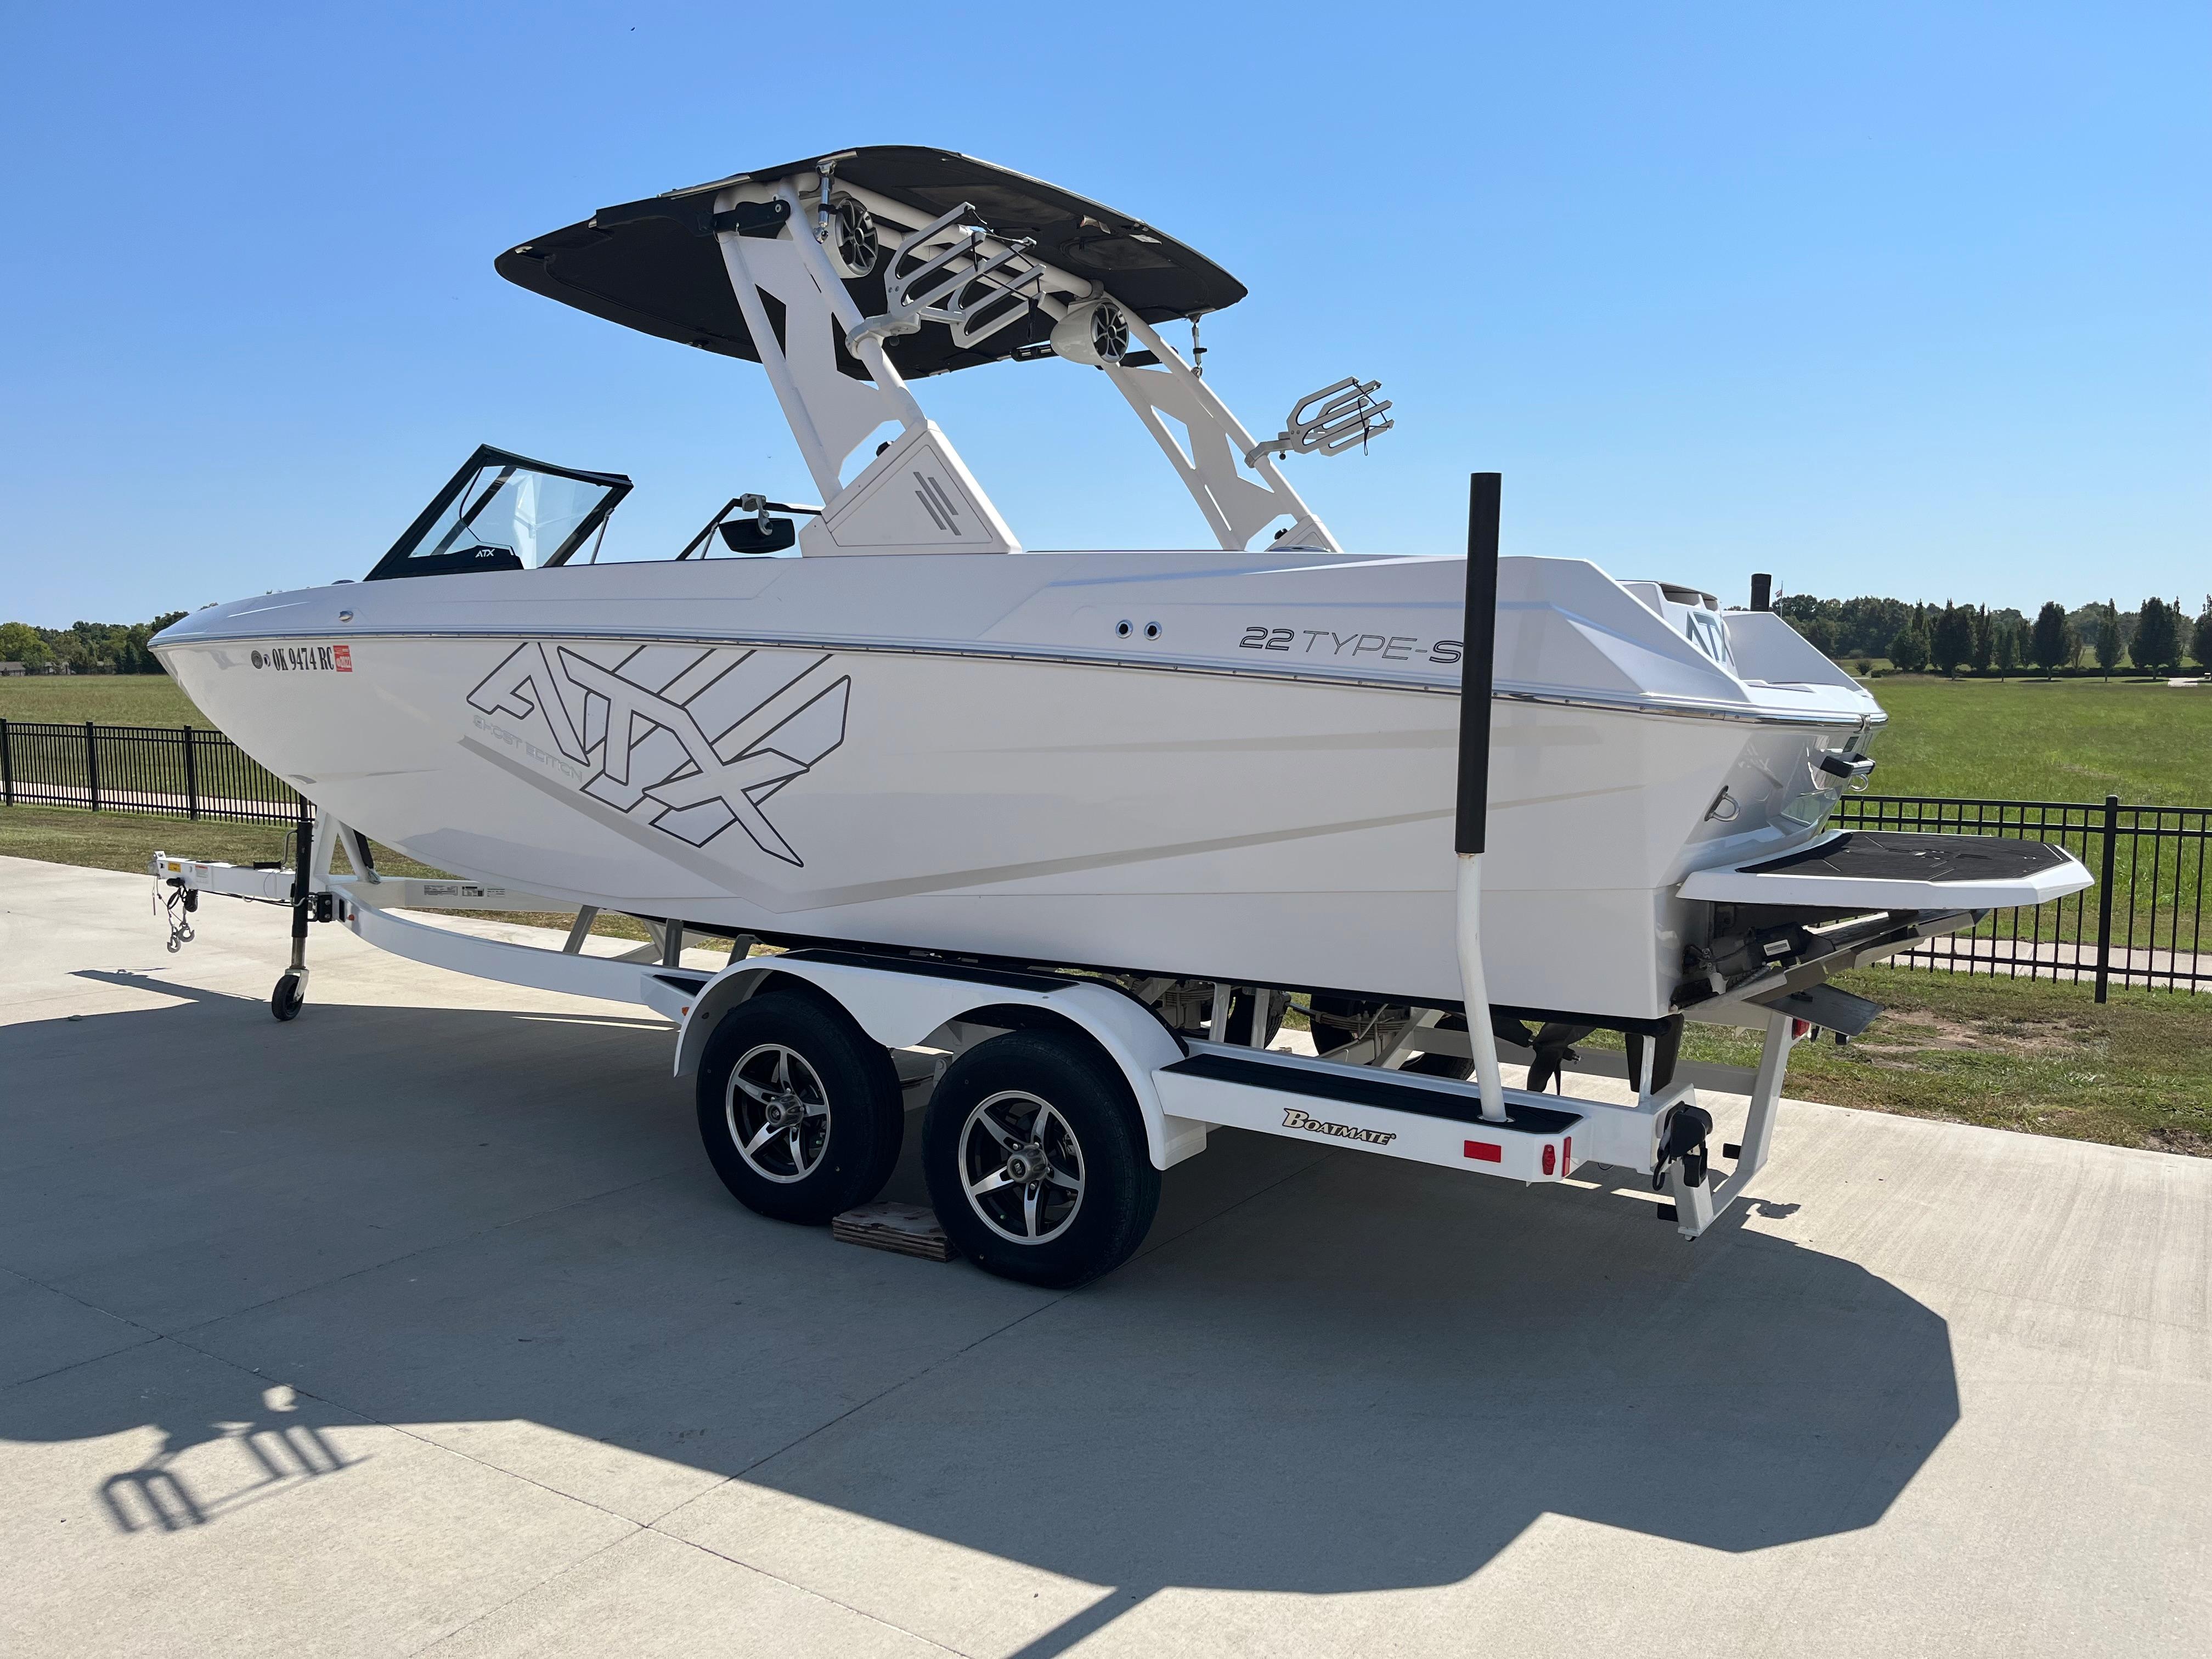 2020 ATX Surf Boats 22 Type-S